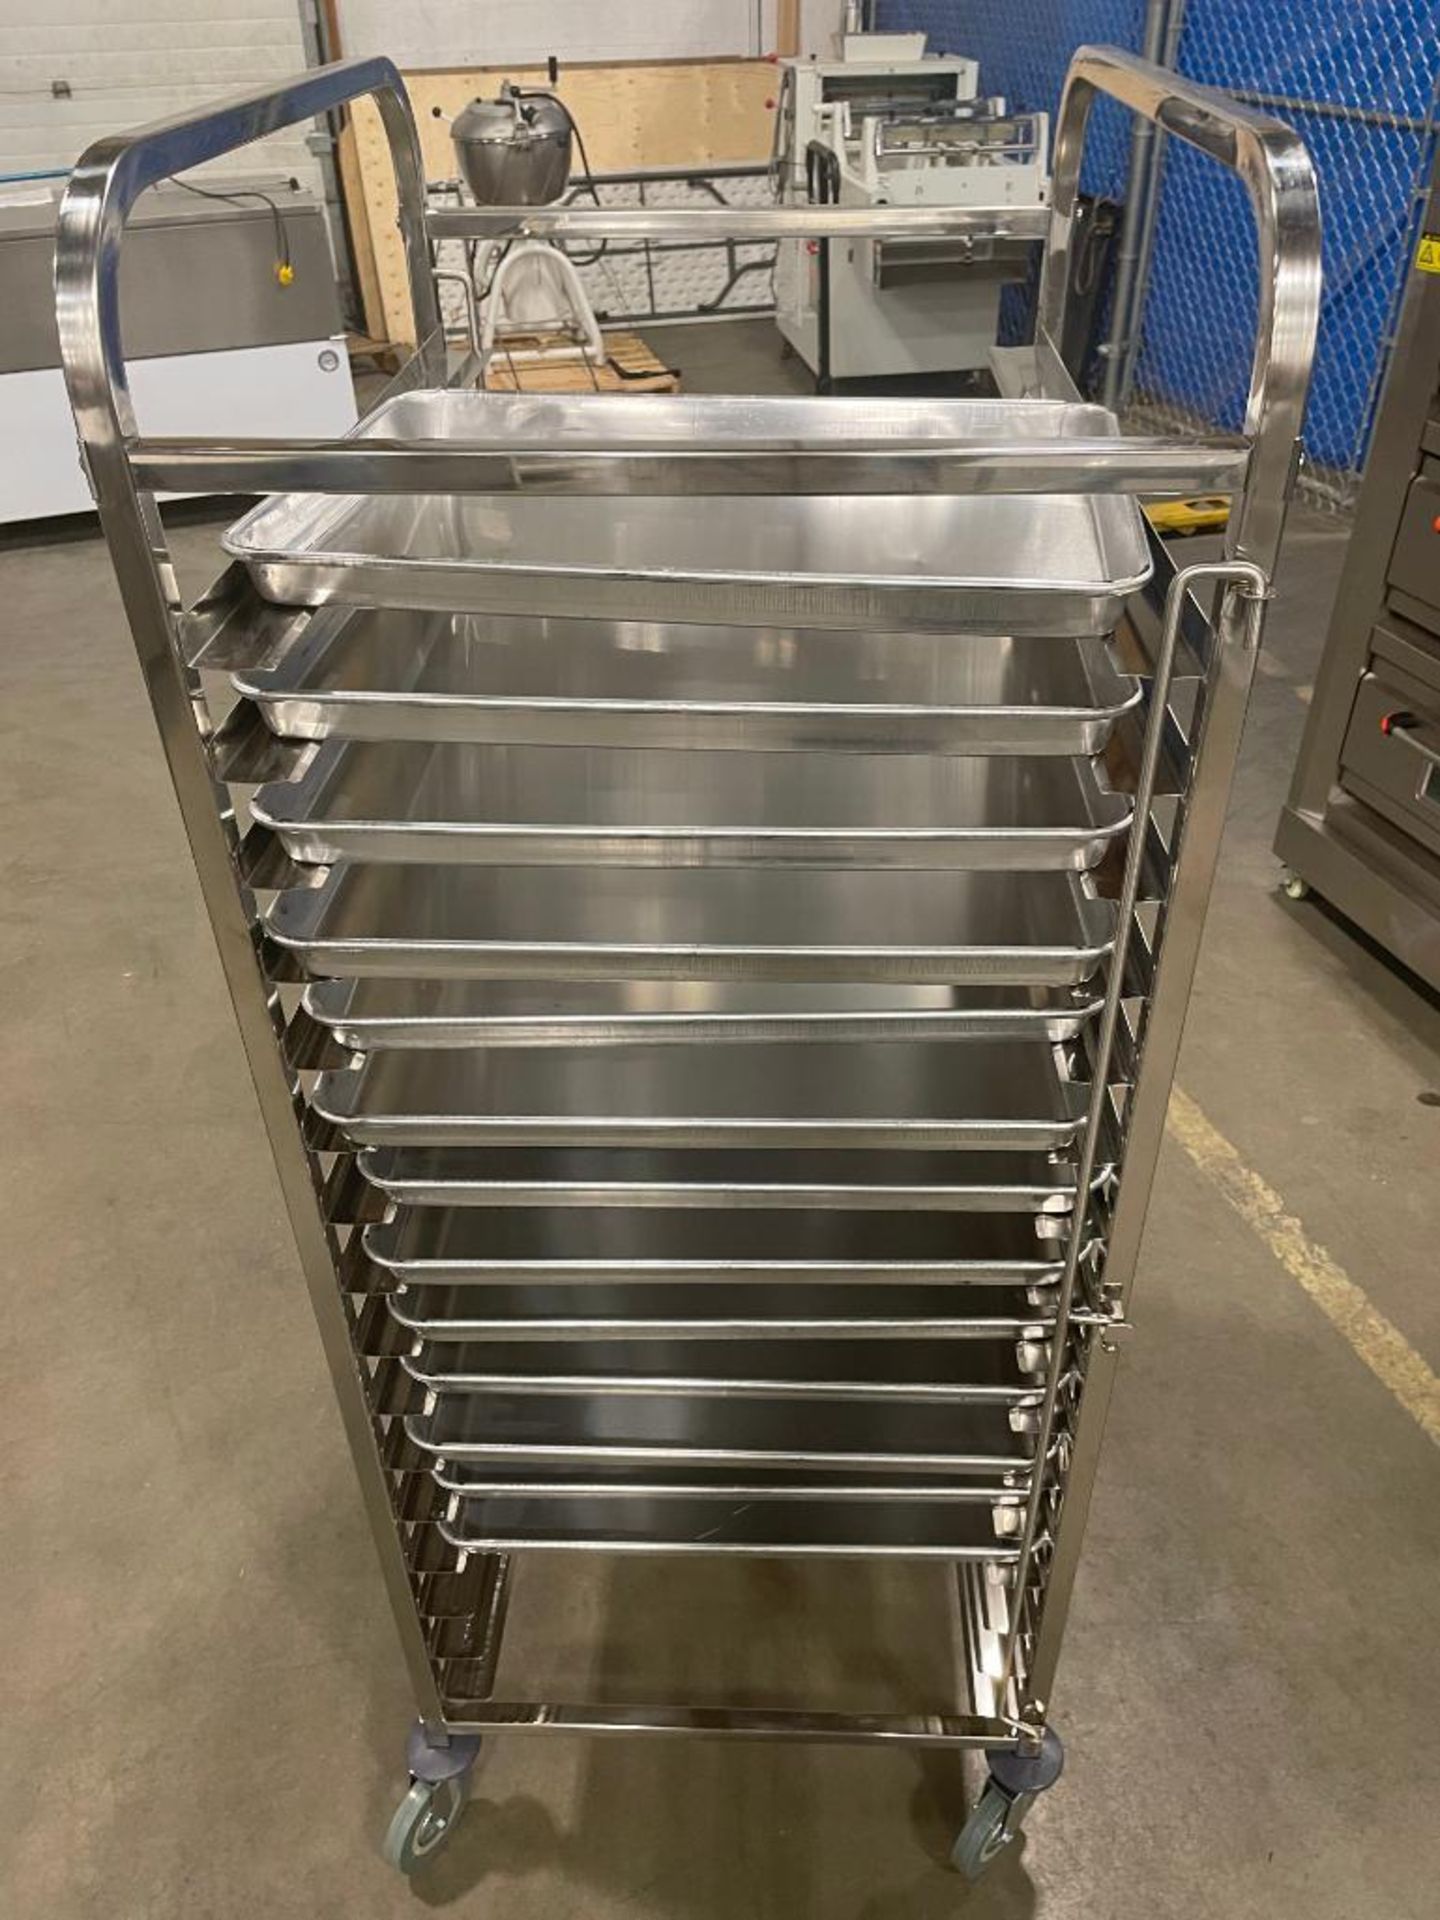 NEW STAINLESS STEEL 16-SLOT OVERSIZED BUN PAN RACK WITH PAN GUARD & (22) PANS - Image 6 of 9